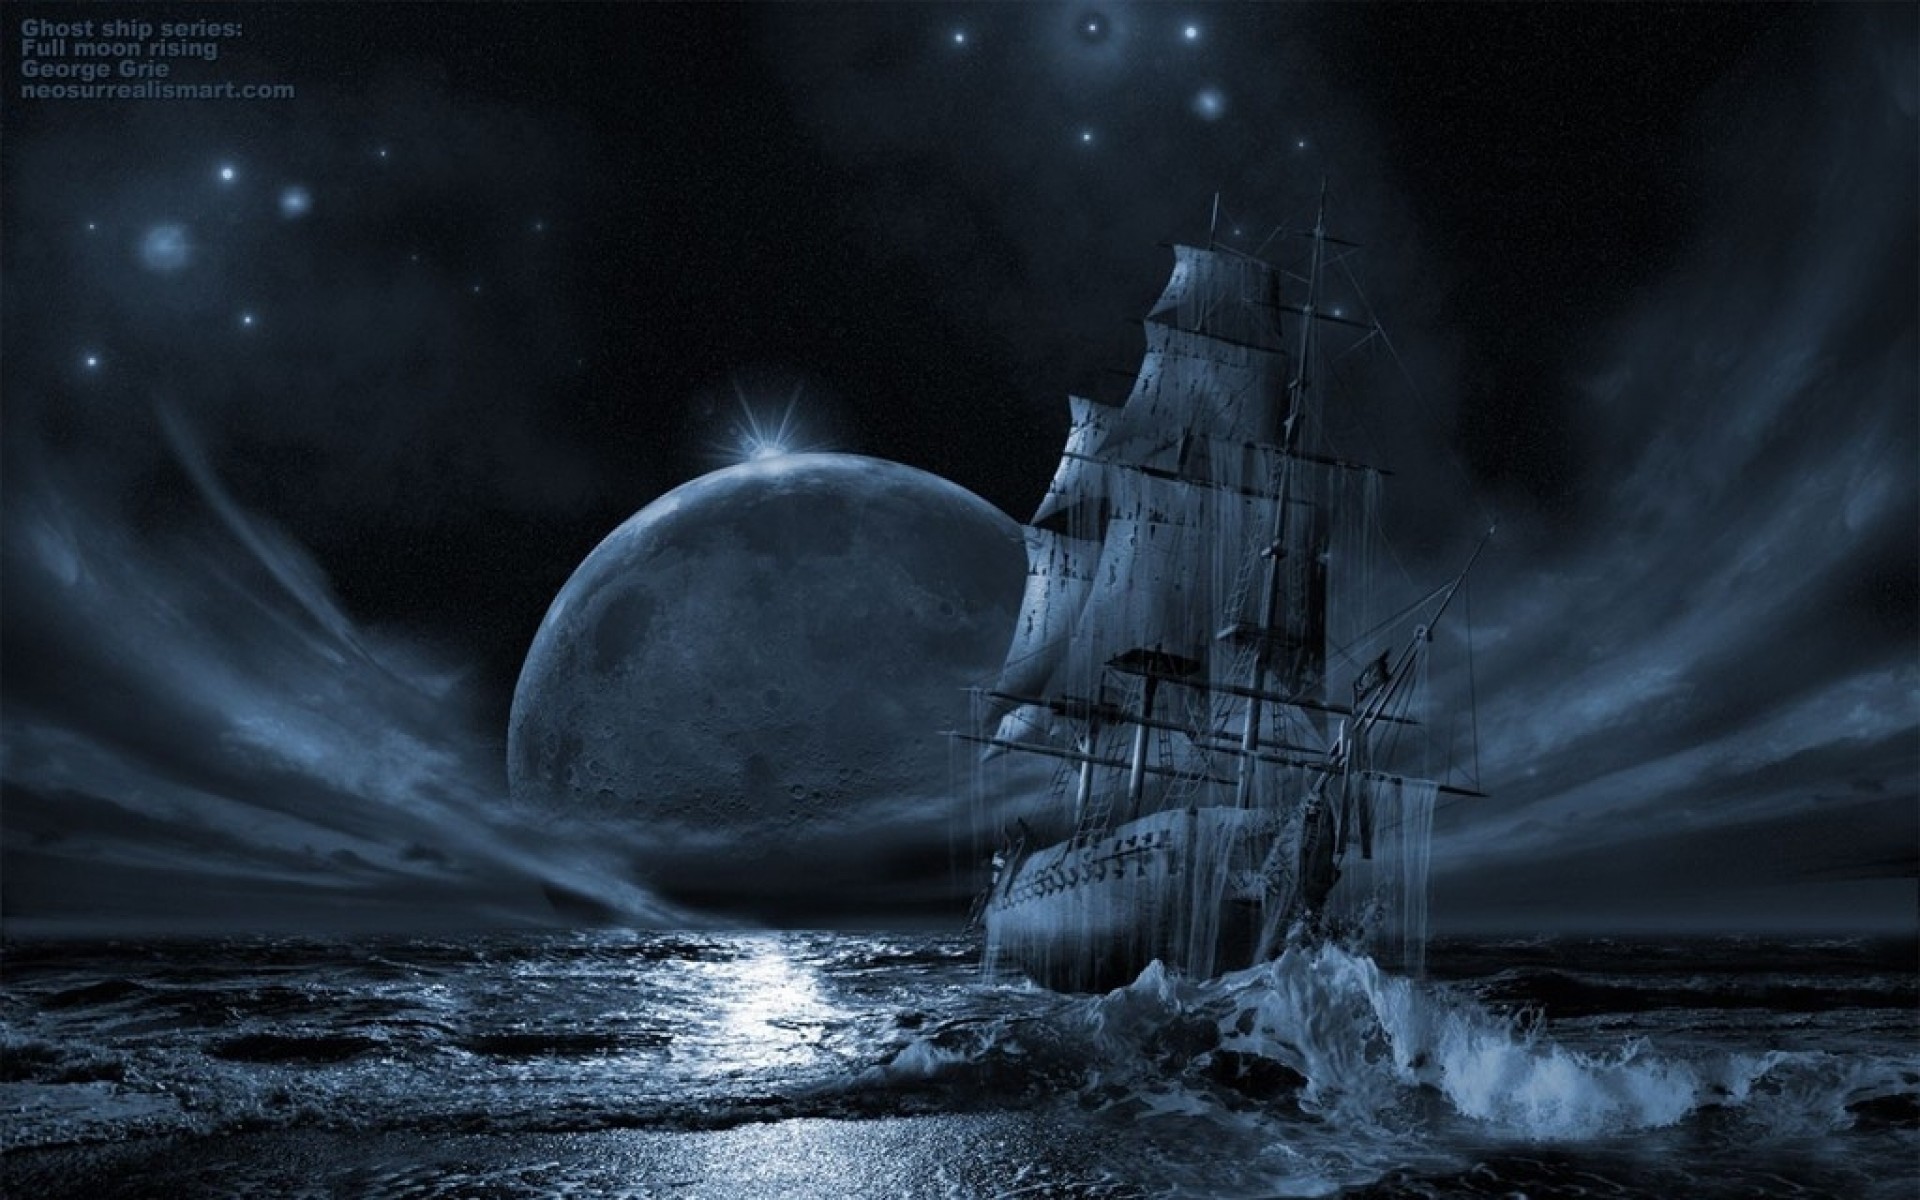 1920x1200 Free Computer Desktop Wallpaper:Ghost Ship Series: Full Moon Rising, Mixed  Media, Fantasy Art, You Might Not Be Aware That Ghost Ships Have Existed  For ...